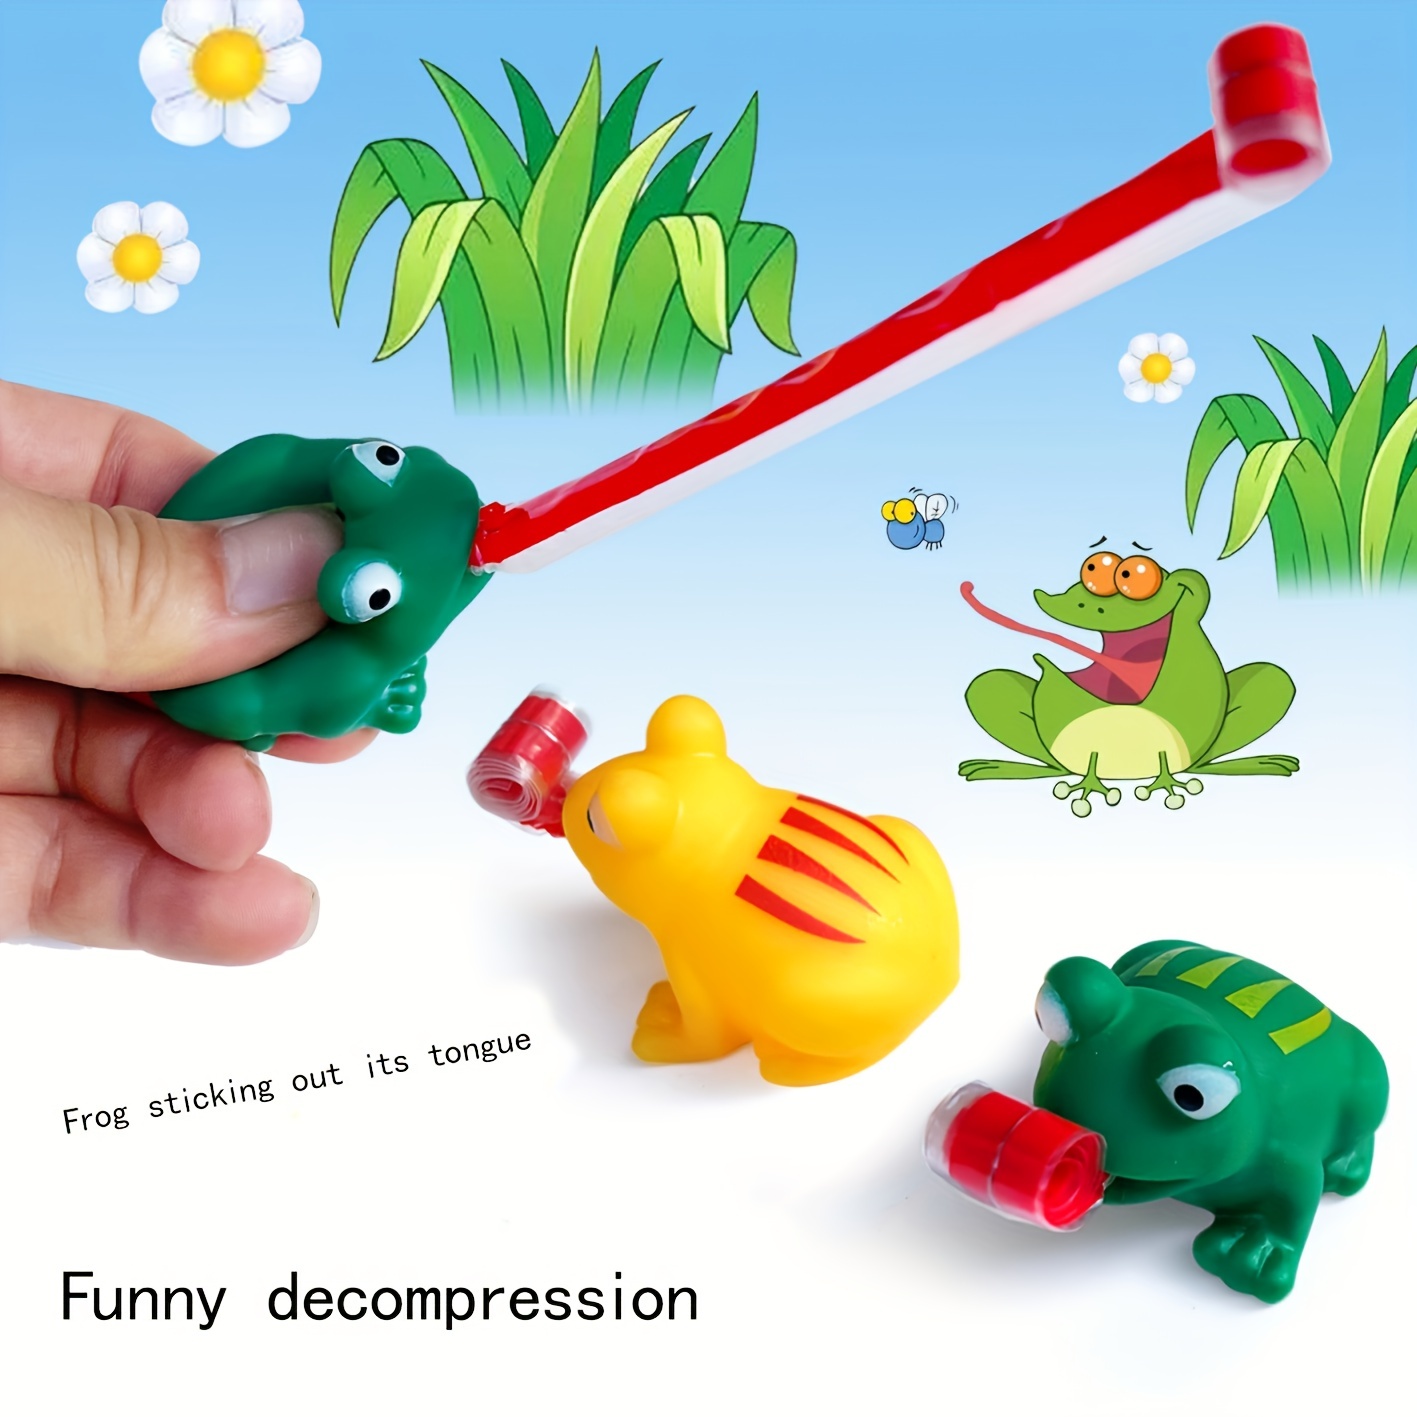 12pcs Jumping Frog Toy Bouncing Frog Plastic Frog Toys Mini Frog Figurines  Figure Reptile Animals Figures Models for Kids